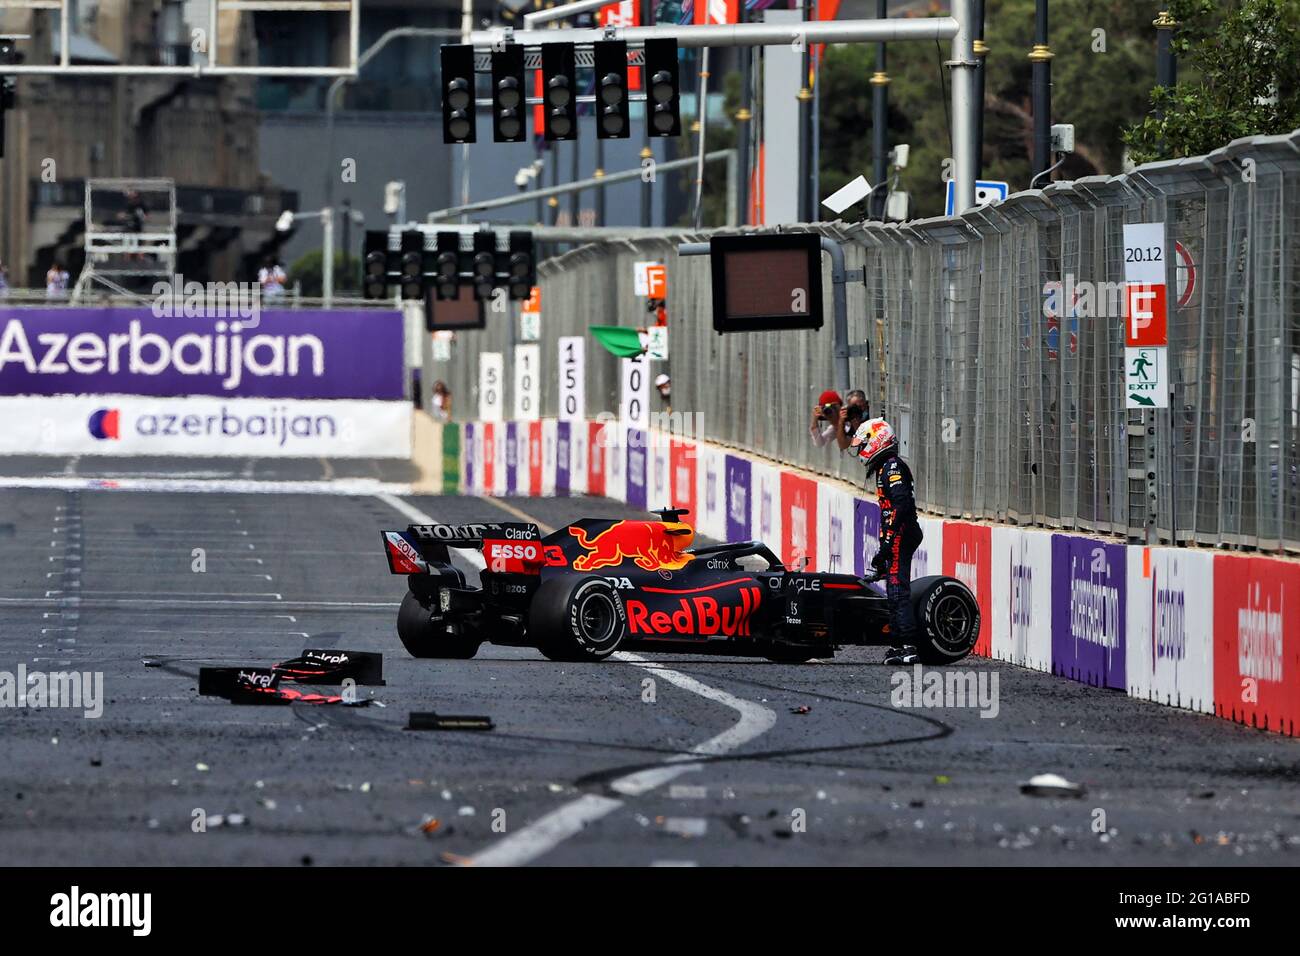 Baku, Azerbaijan. 06th June, 2021. Max Verstappen (NLD) Red Bull Racing RB16B crashed out of the lead of the race. Azerbaijan Grand Prix, Sunday 6th June 2021